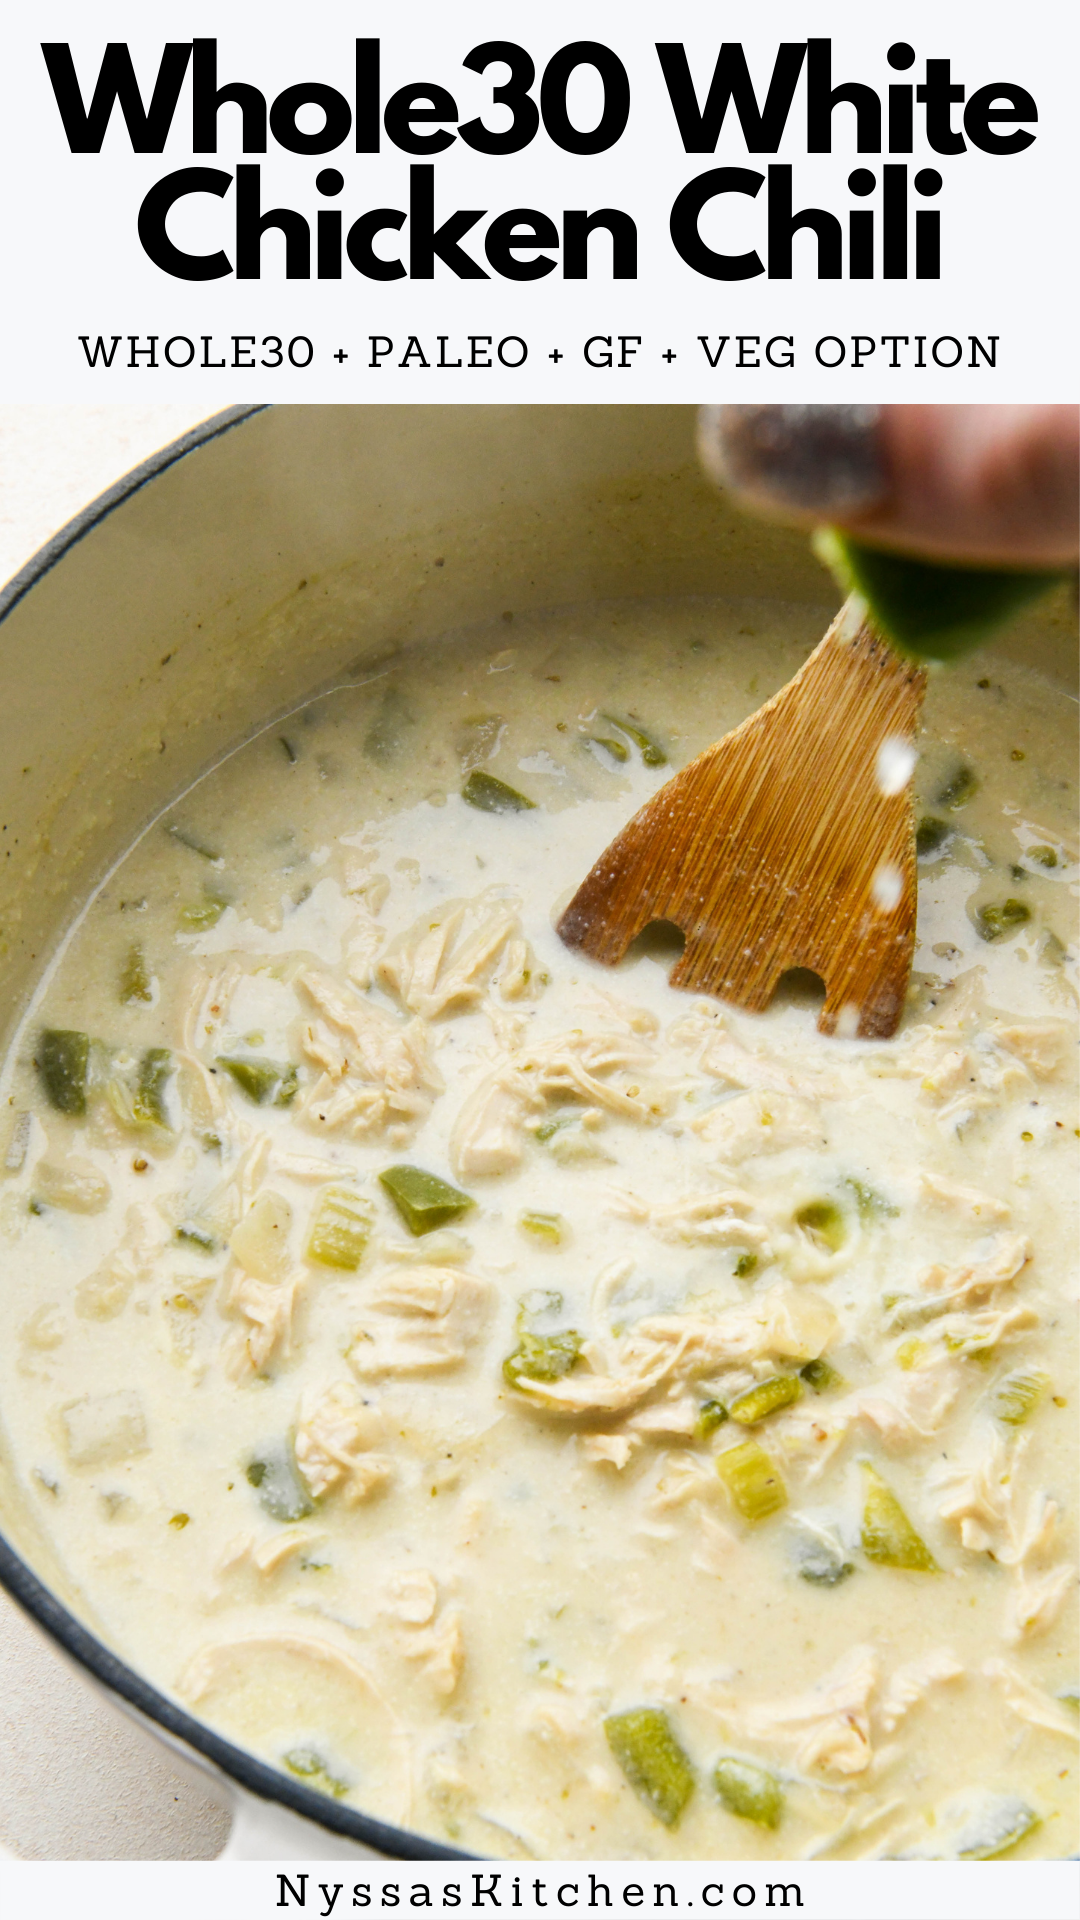 This Whole30 white chicken chili is the perfect easy to make soup for those cold weather days! Made with two kinds of peppers, onions, garlic, a homemade seasoning blend, shredded chicken, and dairy free cashew cream. A healthy and satisfying twist on a southwest classic! Paleo, Whole30, dairy free, gluten free, vegan option.